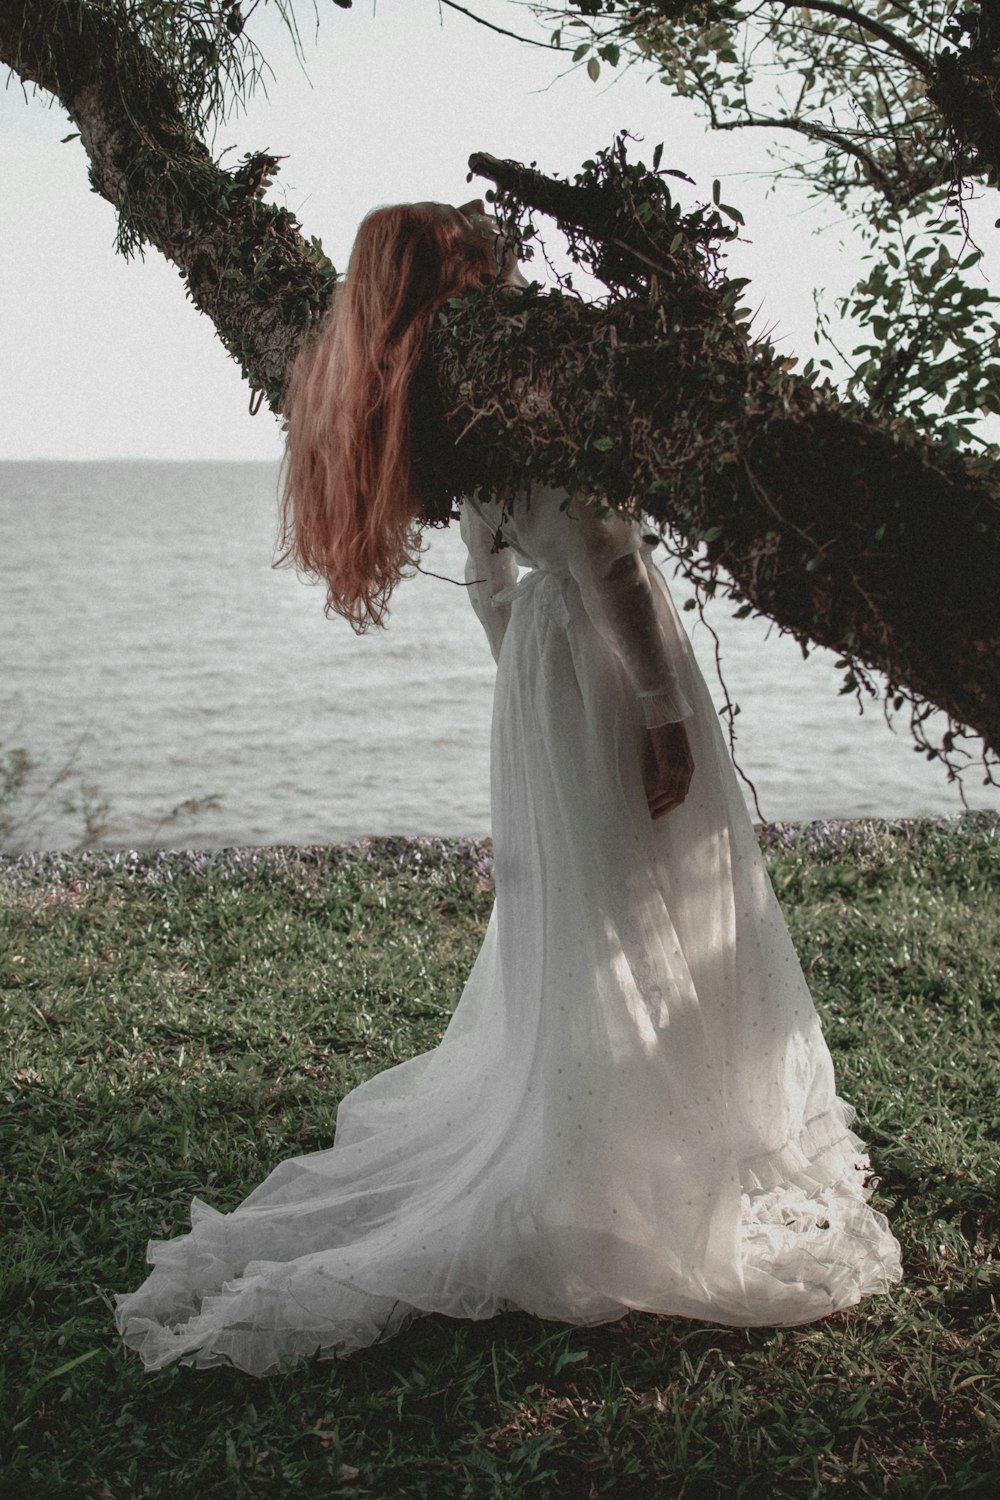 woman in white wedding dress standing on green grass field near body of water during daytime